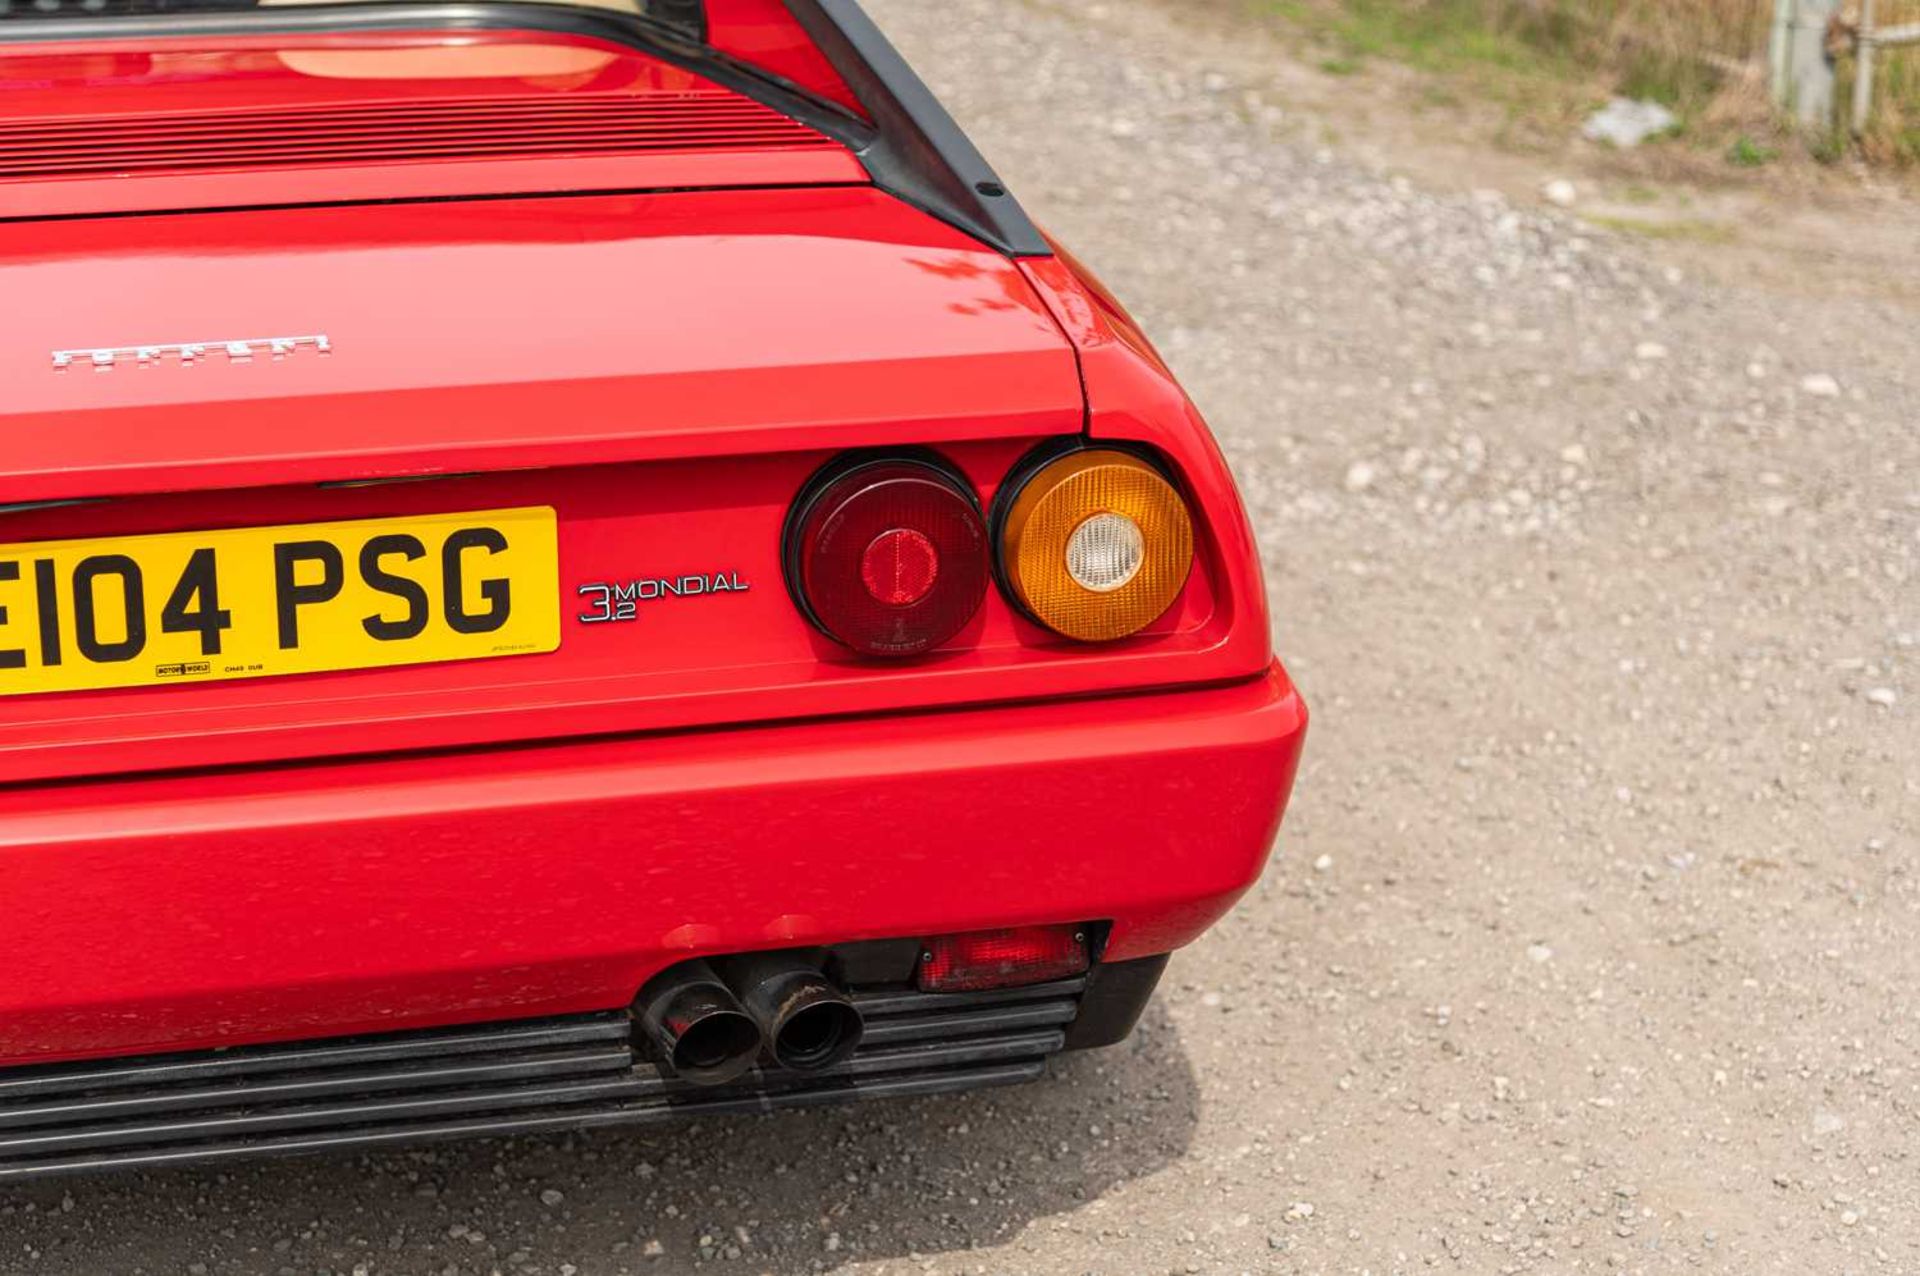 1988 Ferrari Mondial QV ***NO RESERVE*** Remained in the same ownership for nearly two decades finis - Image 24 of 91